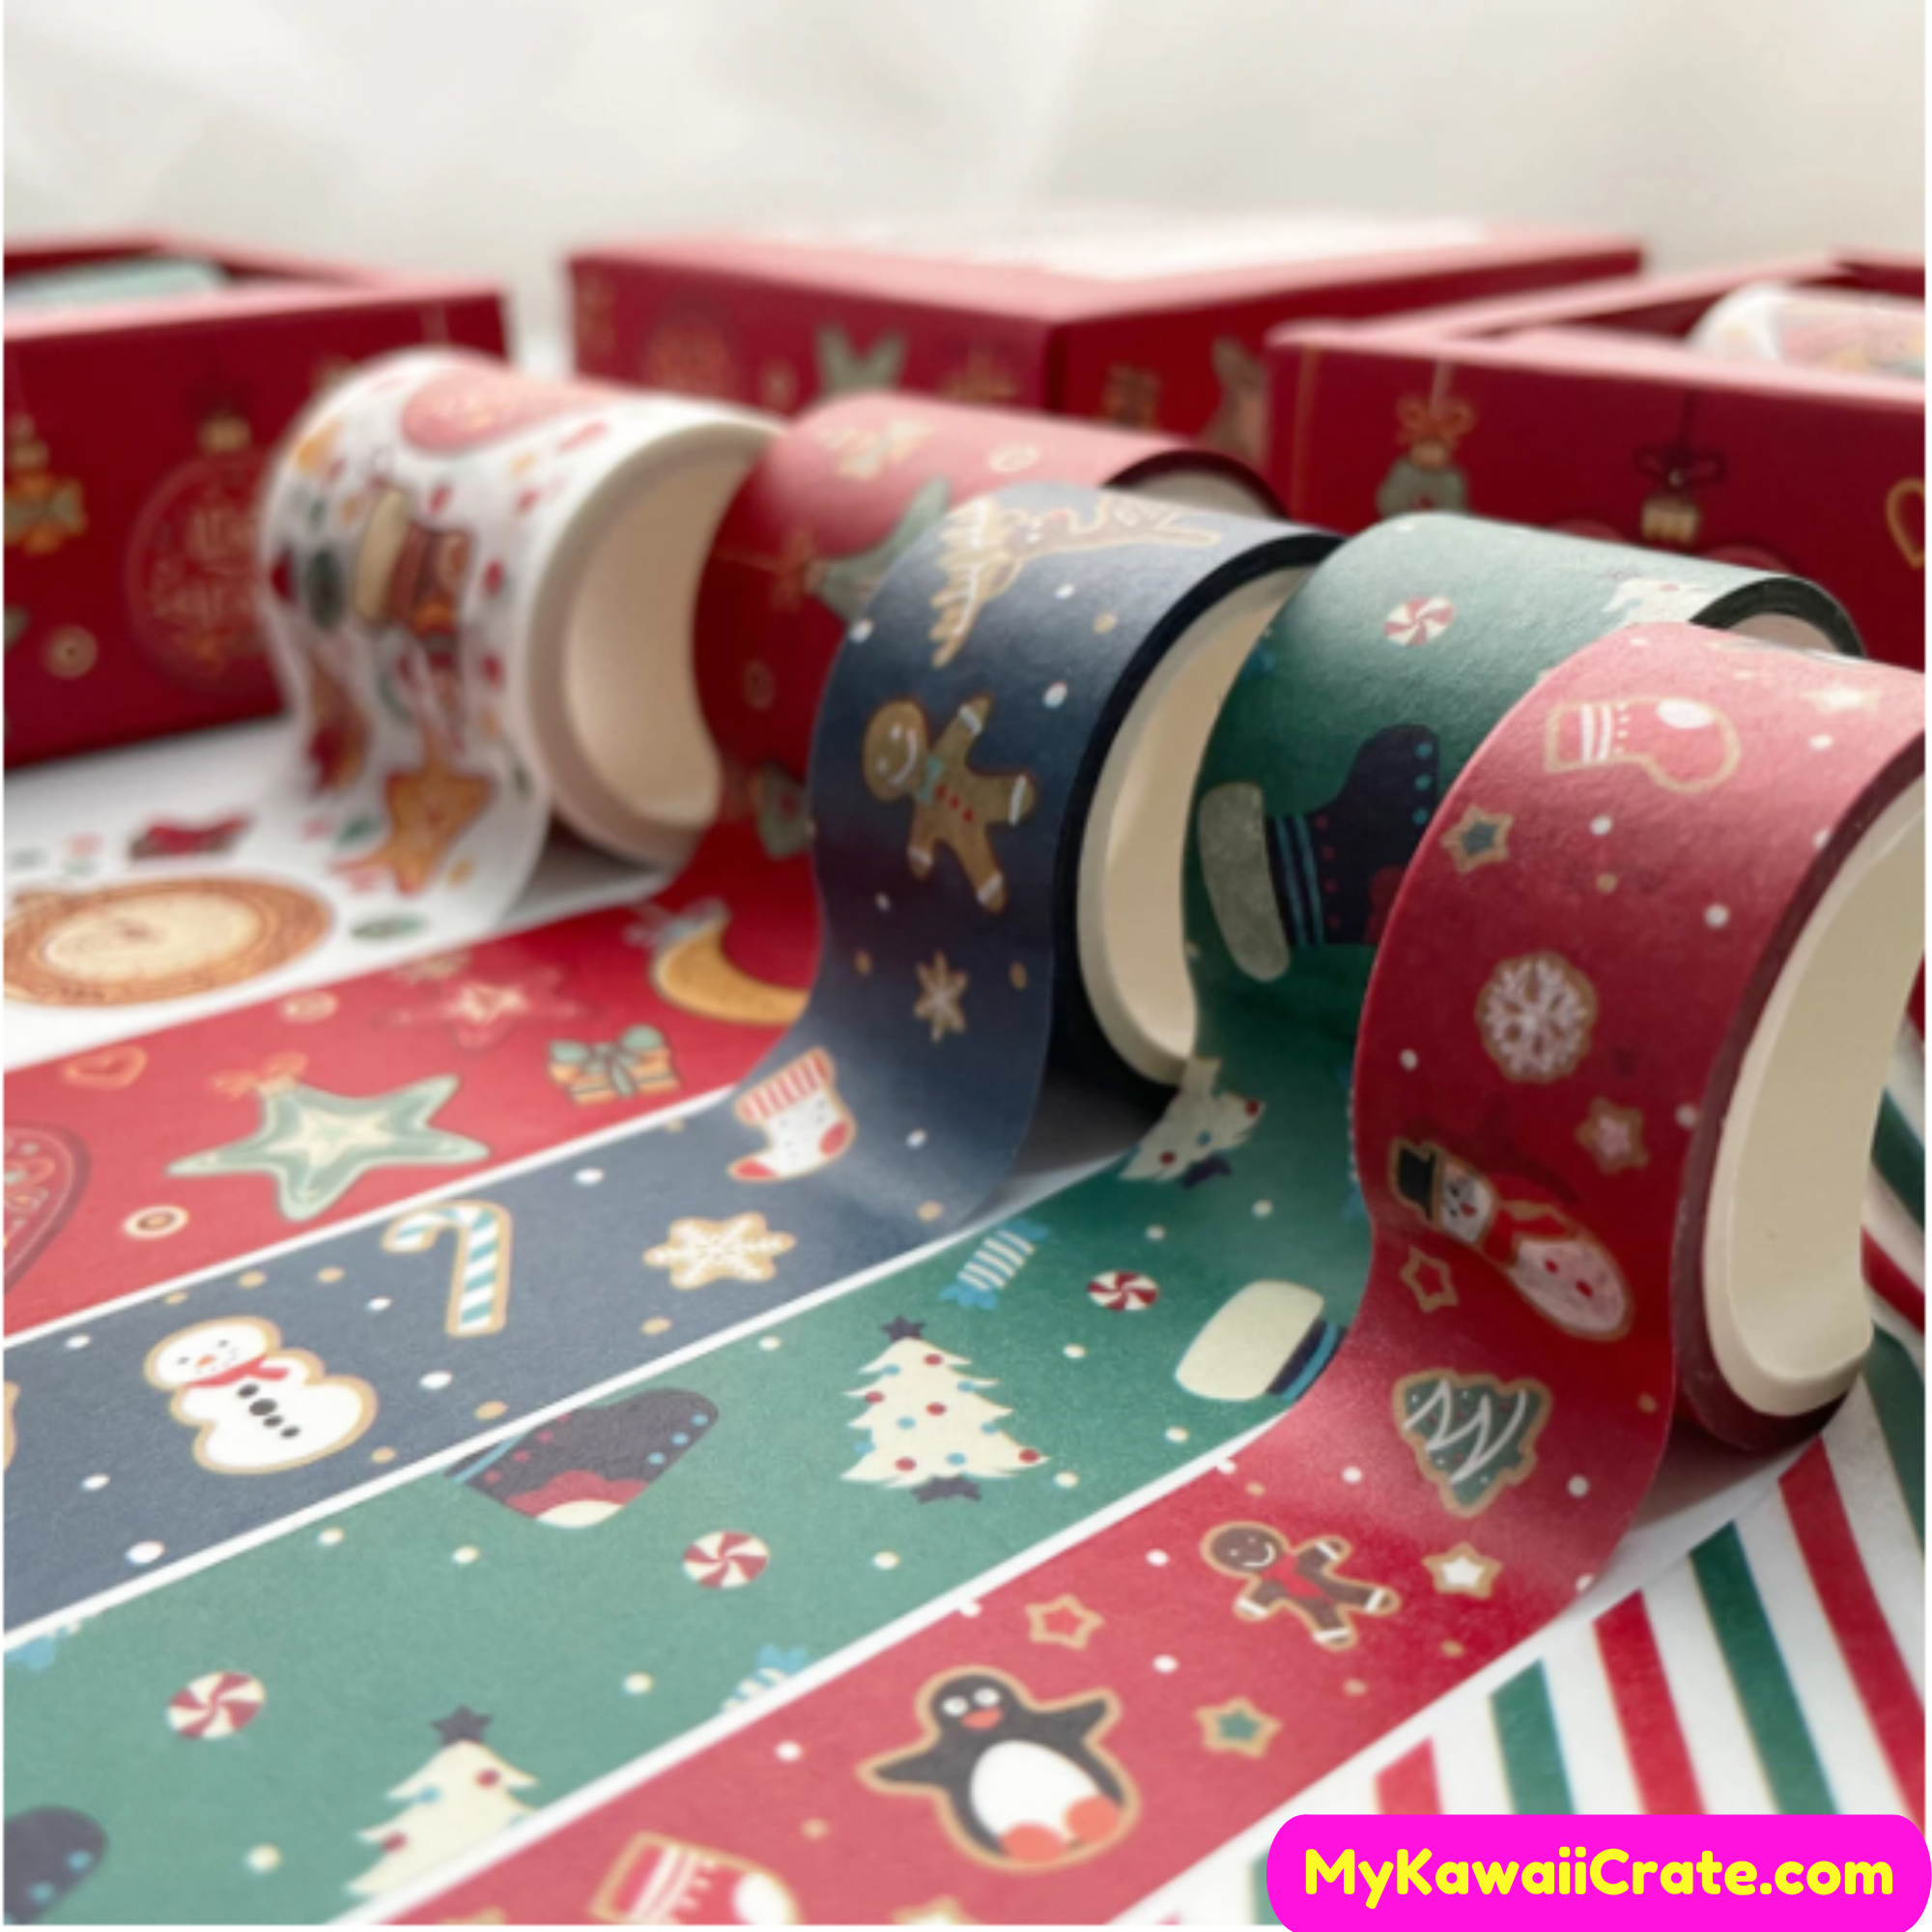 COHEALI 96 Rolls Christmas Washi Tape Decorative Duct Tape Christmas Wall  Tape Scrapbook Tape Wide Decorative Tape for Art Notebook Stickers  Christmas